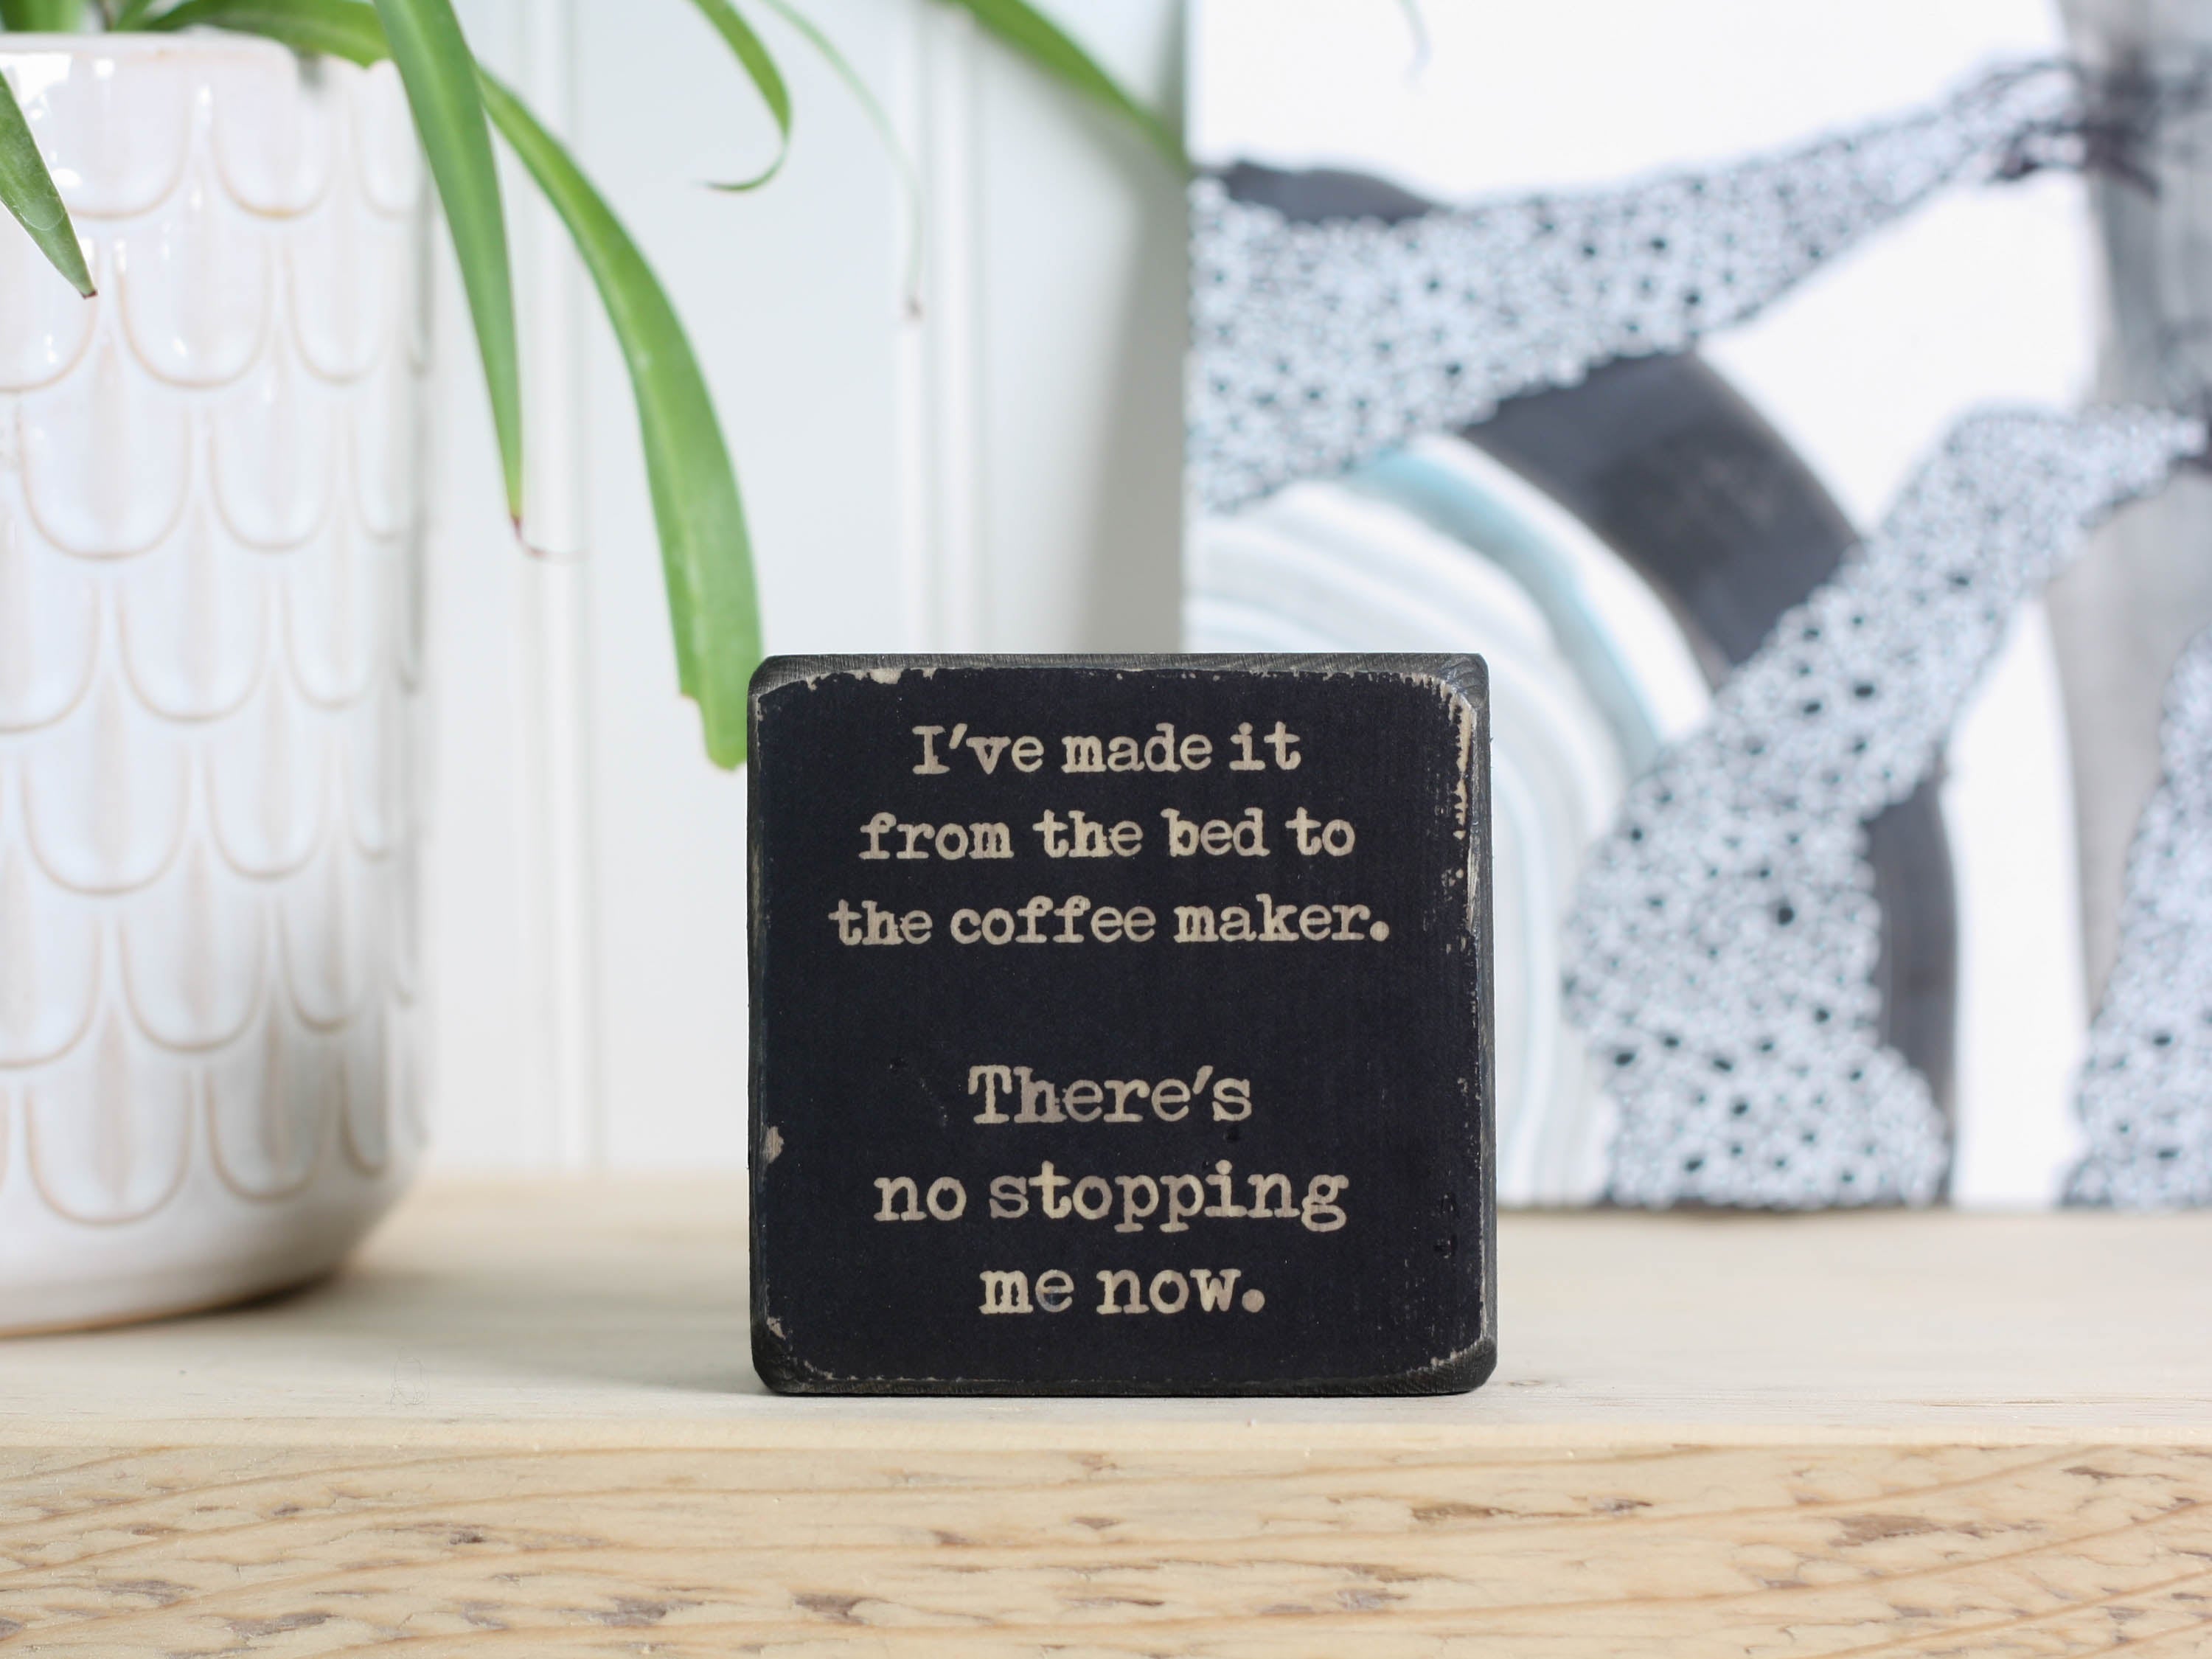 Small wood sign for kitchen in distressed black with the saying "I've made it from the bed to the coffee maker. There's no stopping me now."